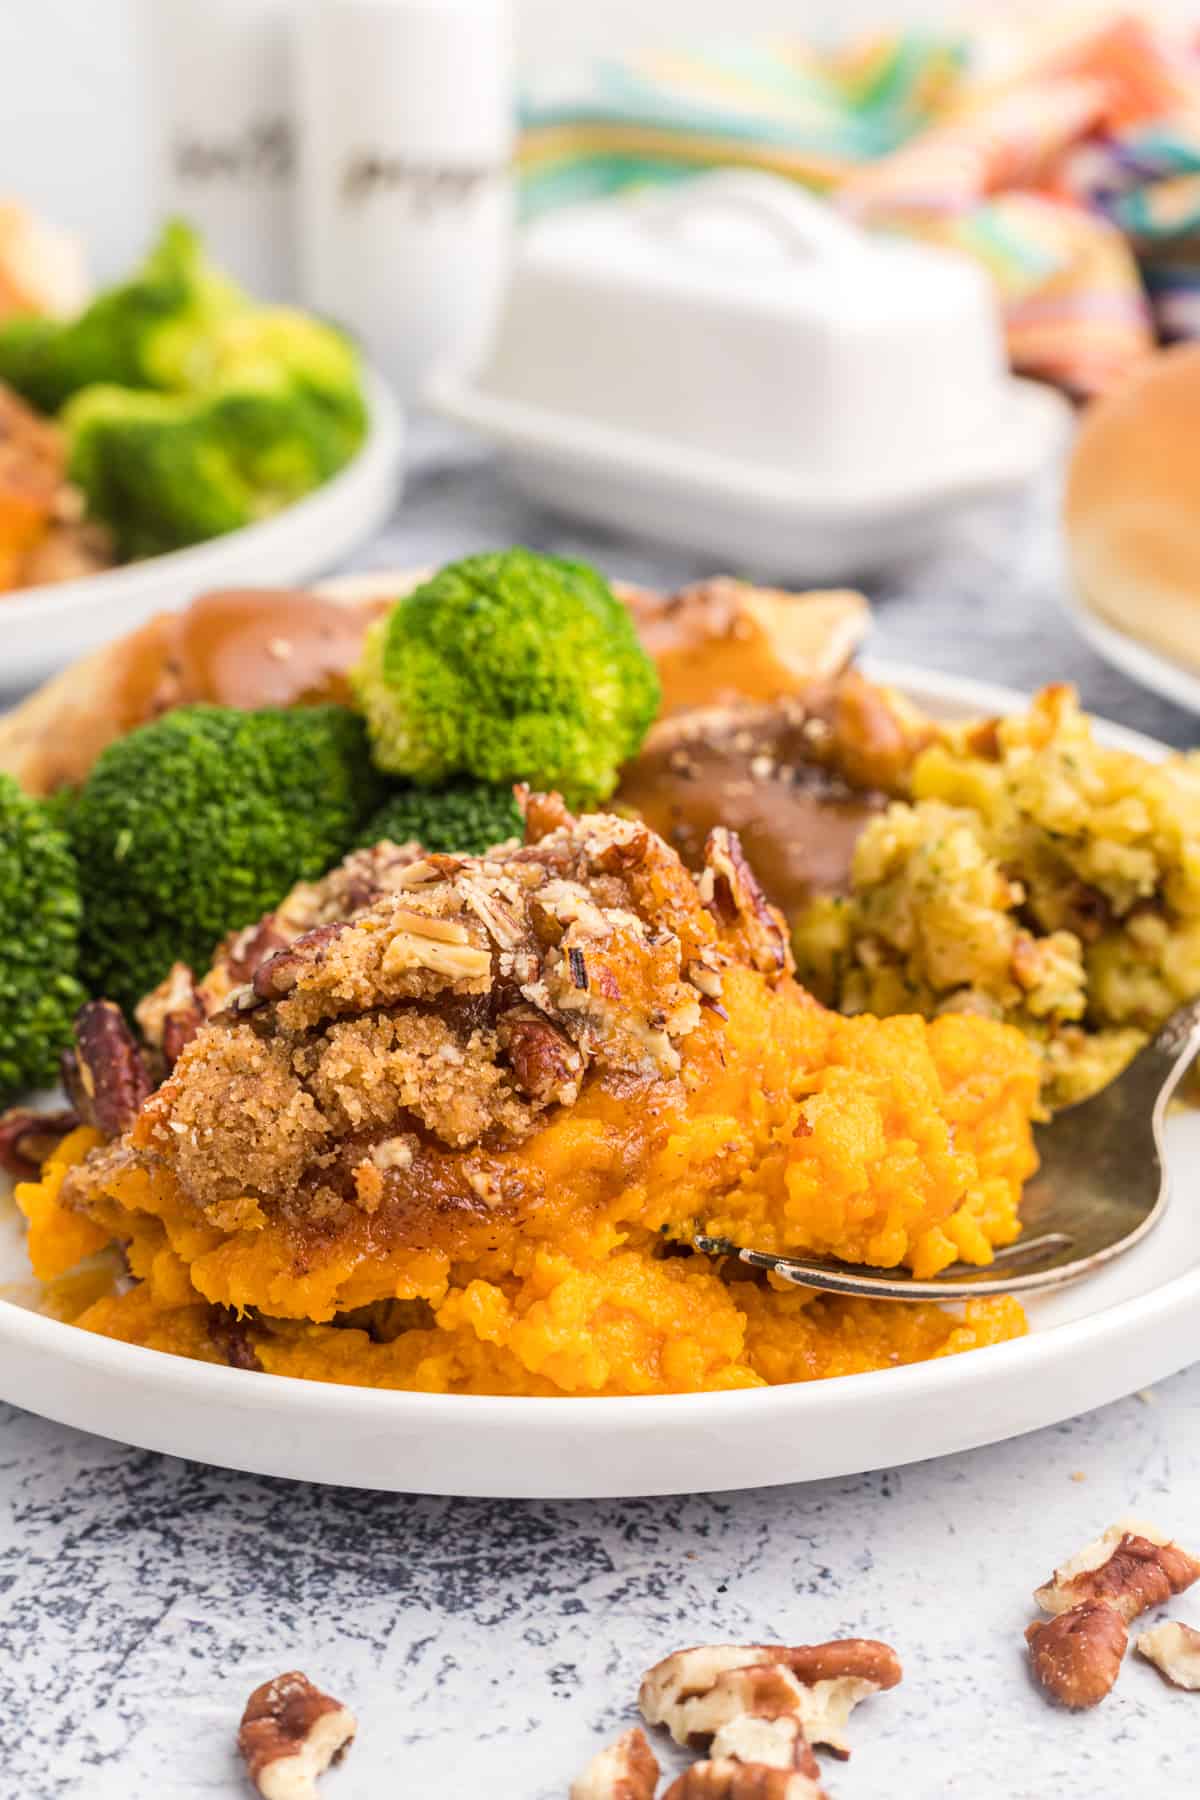 Sweet potato souffle and broccoli are placed on a white plate.